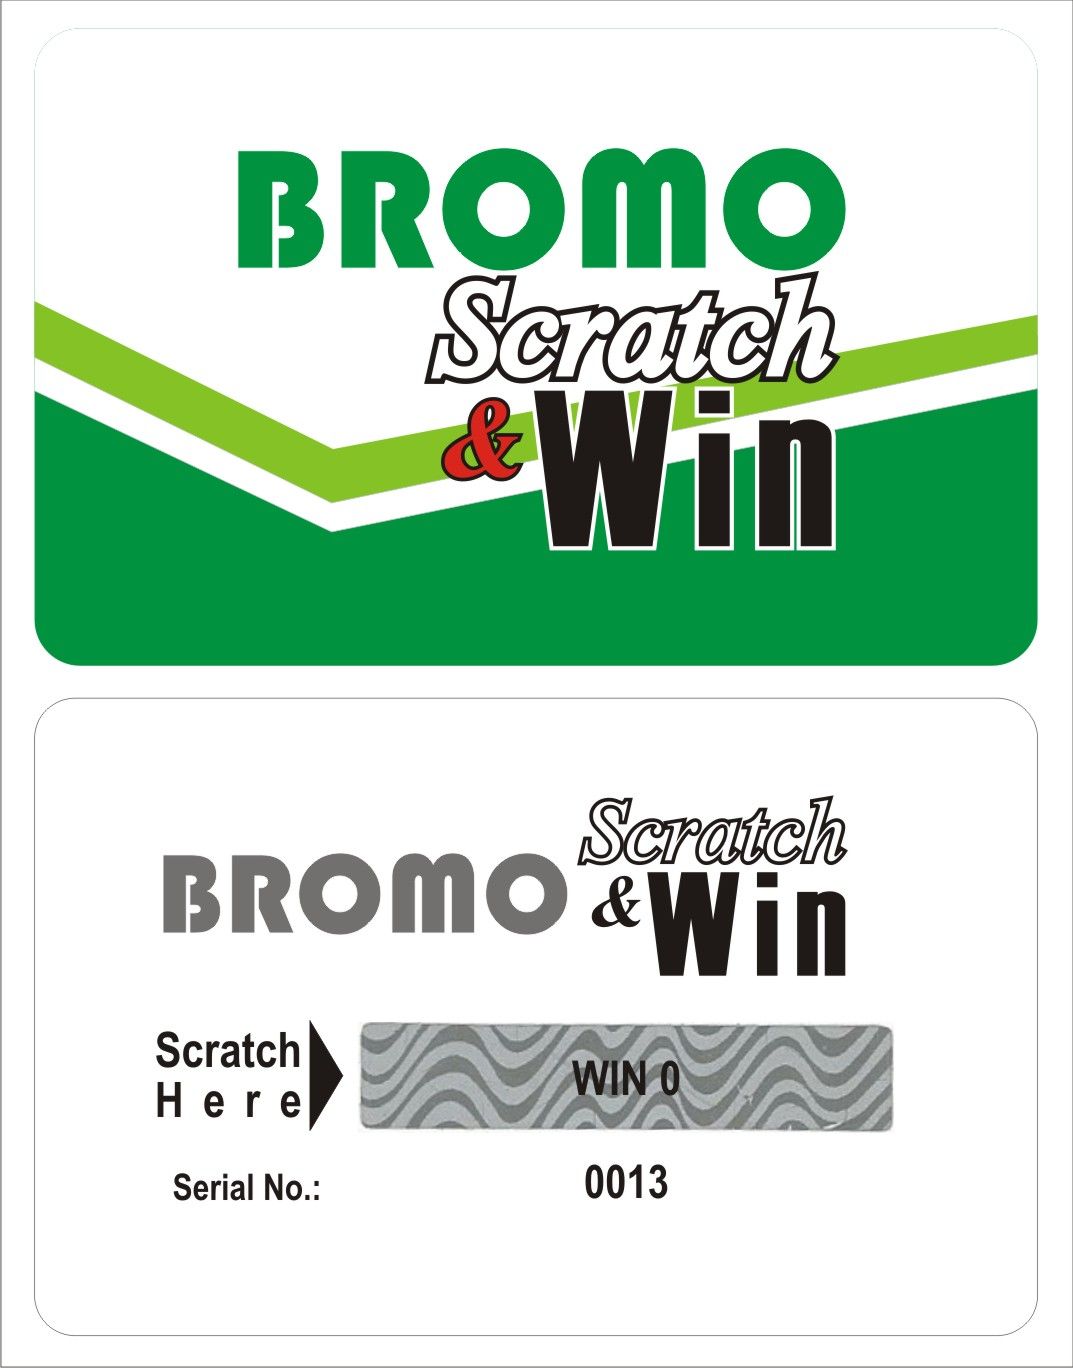 CALL EMMANUEL ON 08176499649 TO PRINT PROMO SCRATCH AND WIN CARDS